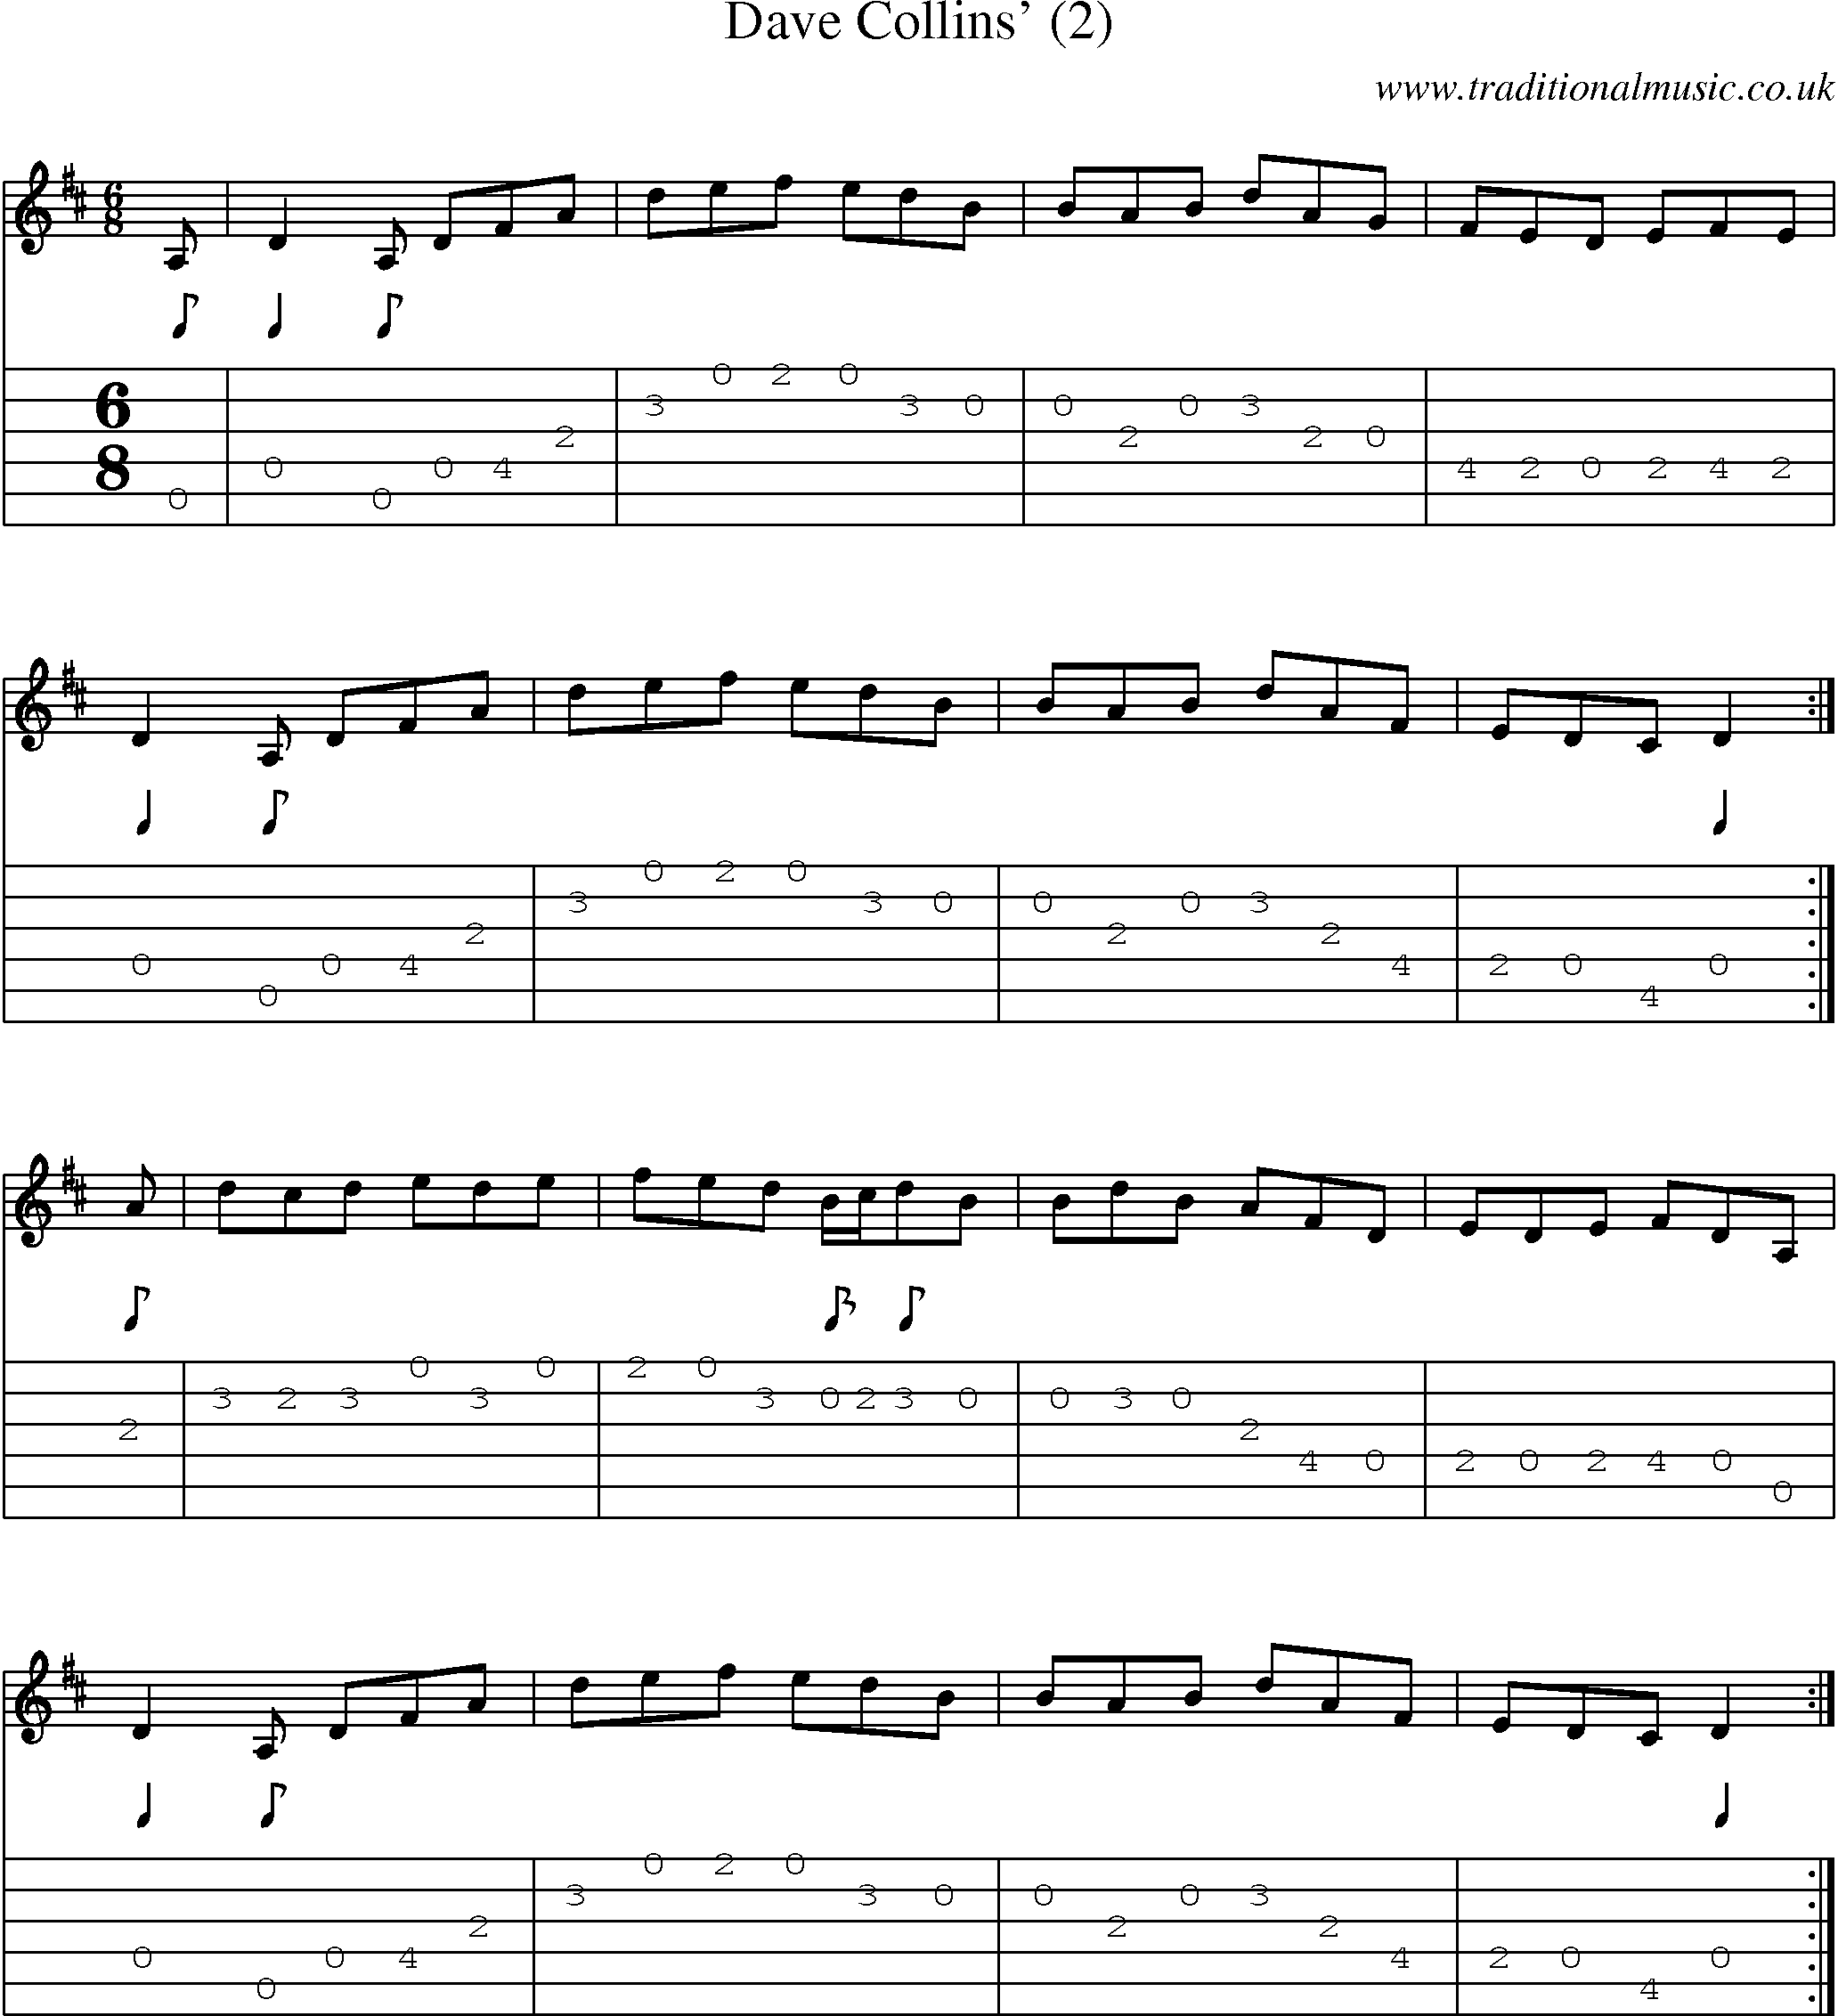 Music Score and Guitar Tabs for Dave Collins